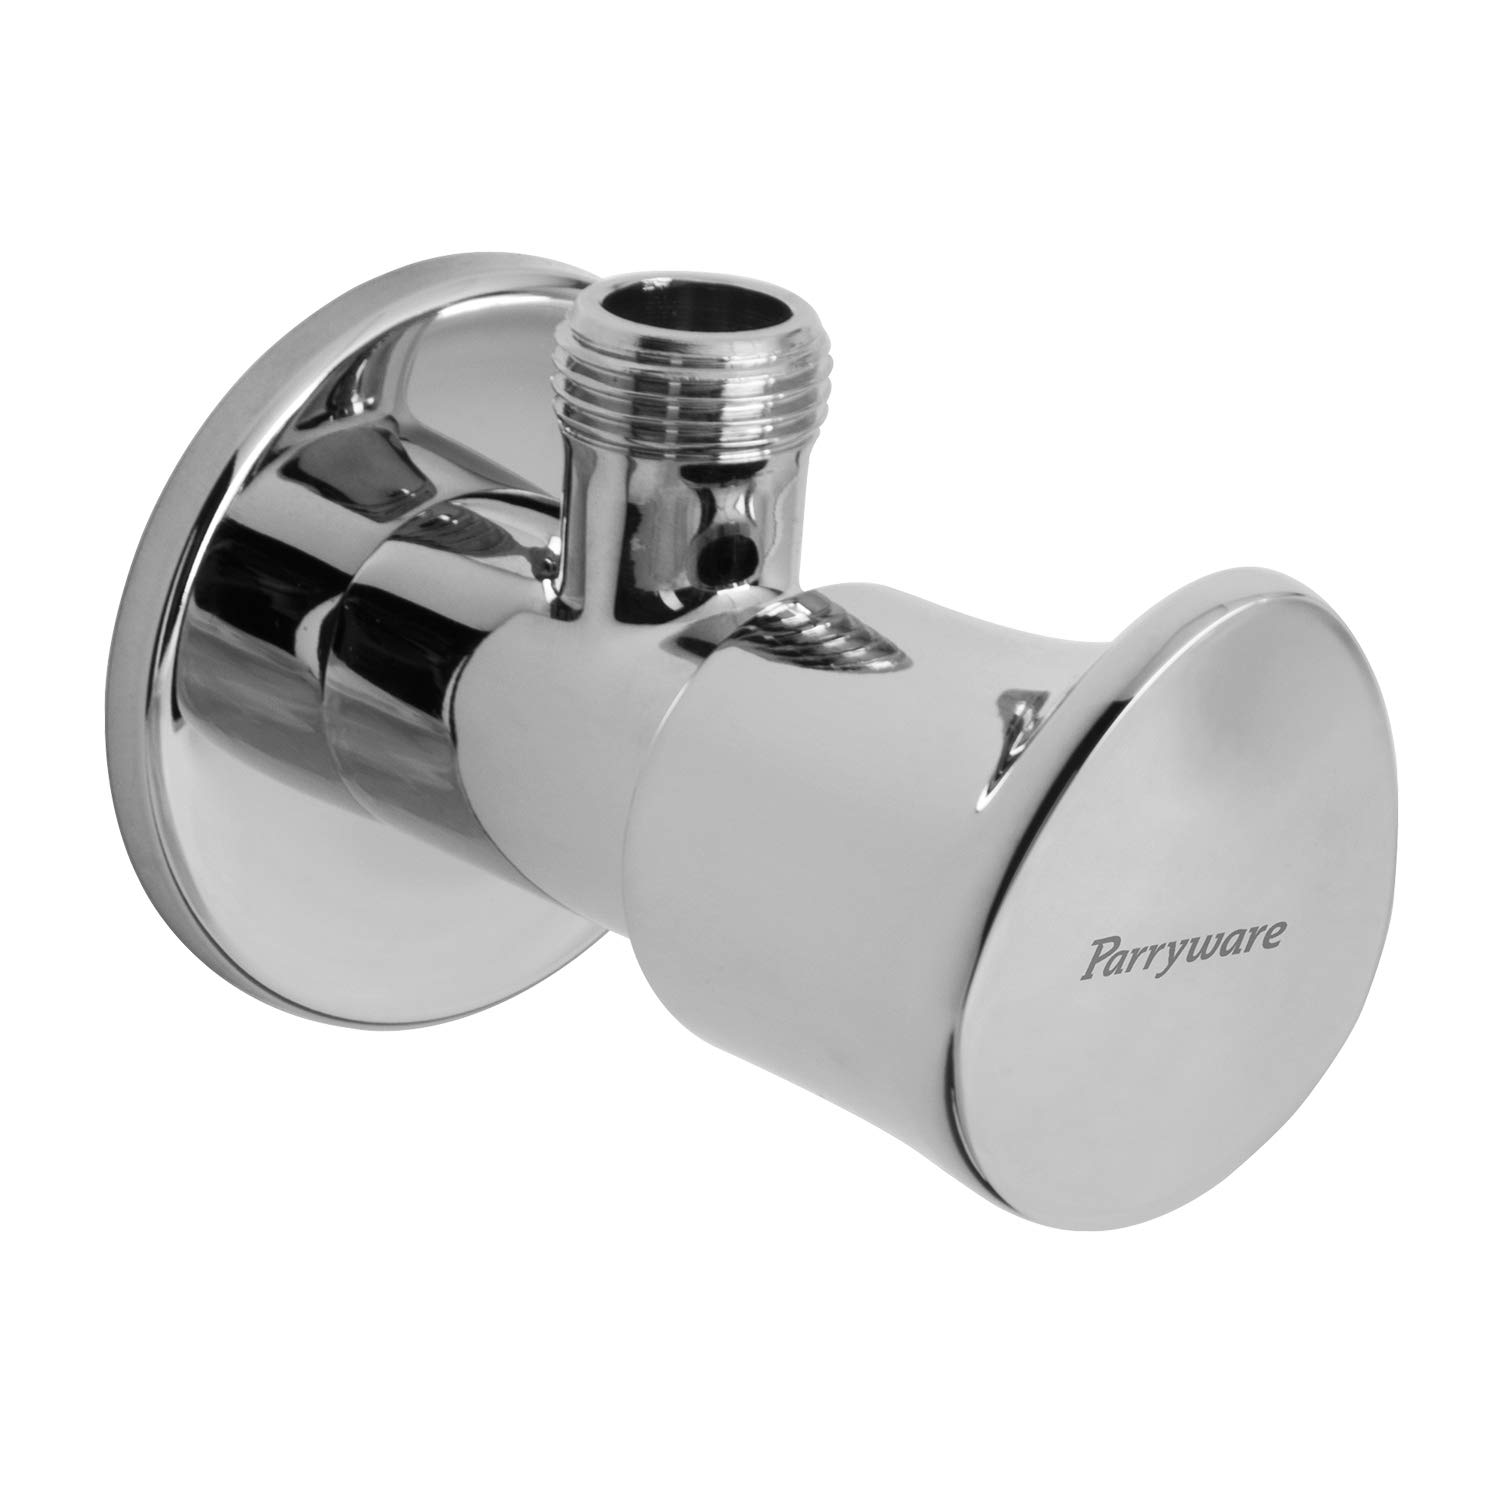 Parryware Droplet Angle Valve G4753A1 (Quarter Turn Range with Ceramic Innerhead) 